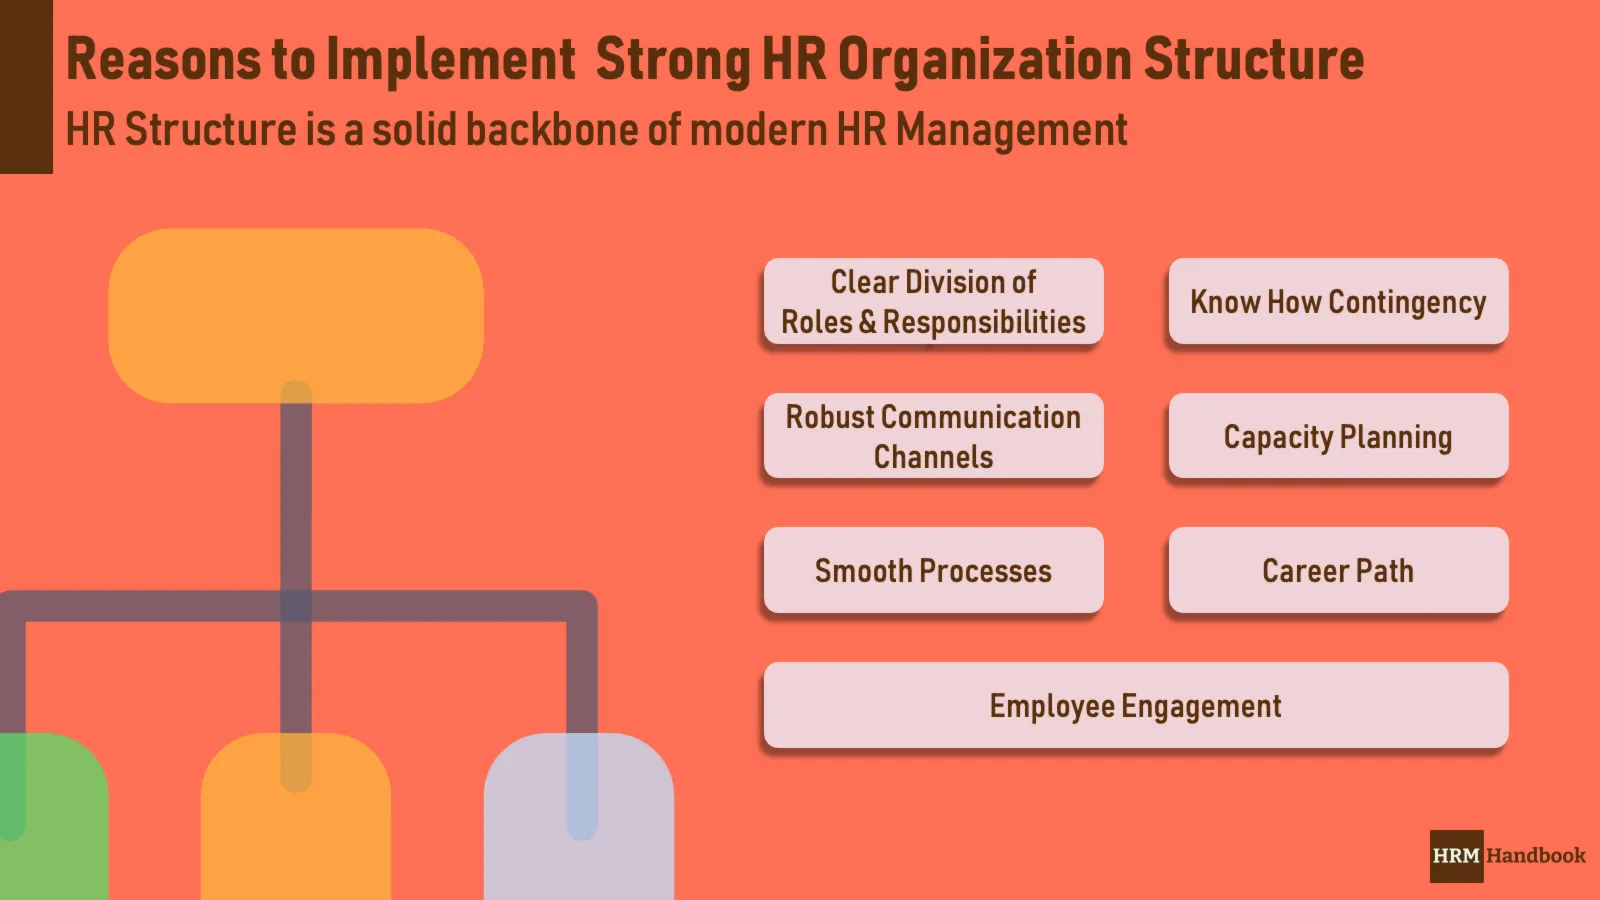 Key Reasons to Implement Strong HR Organization and Key Benefits